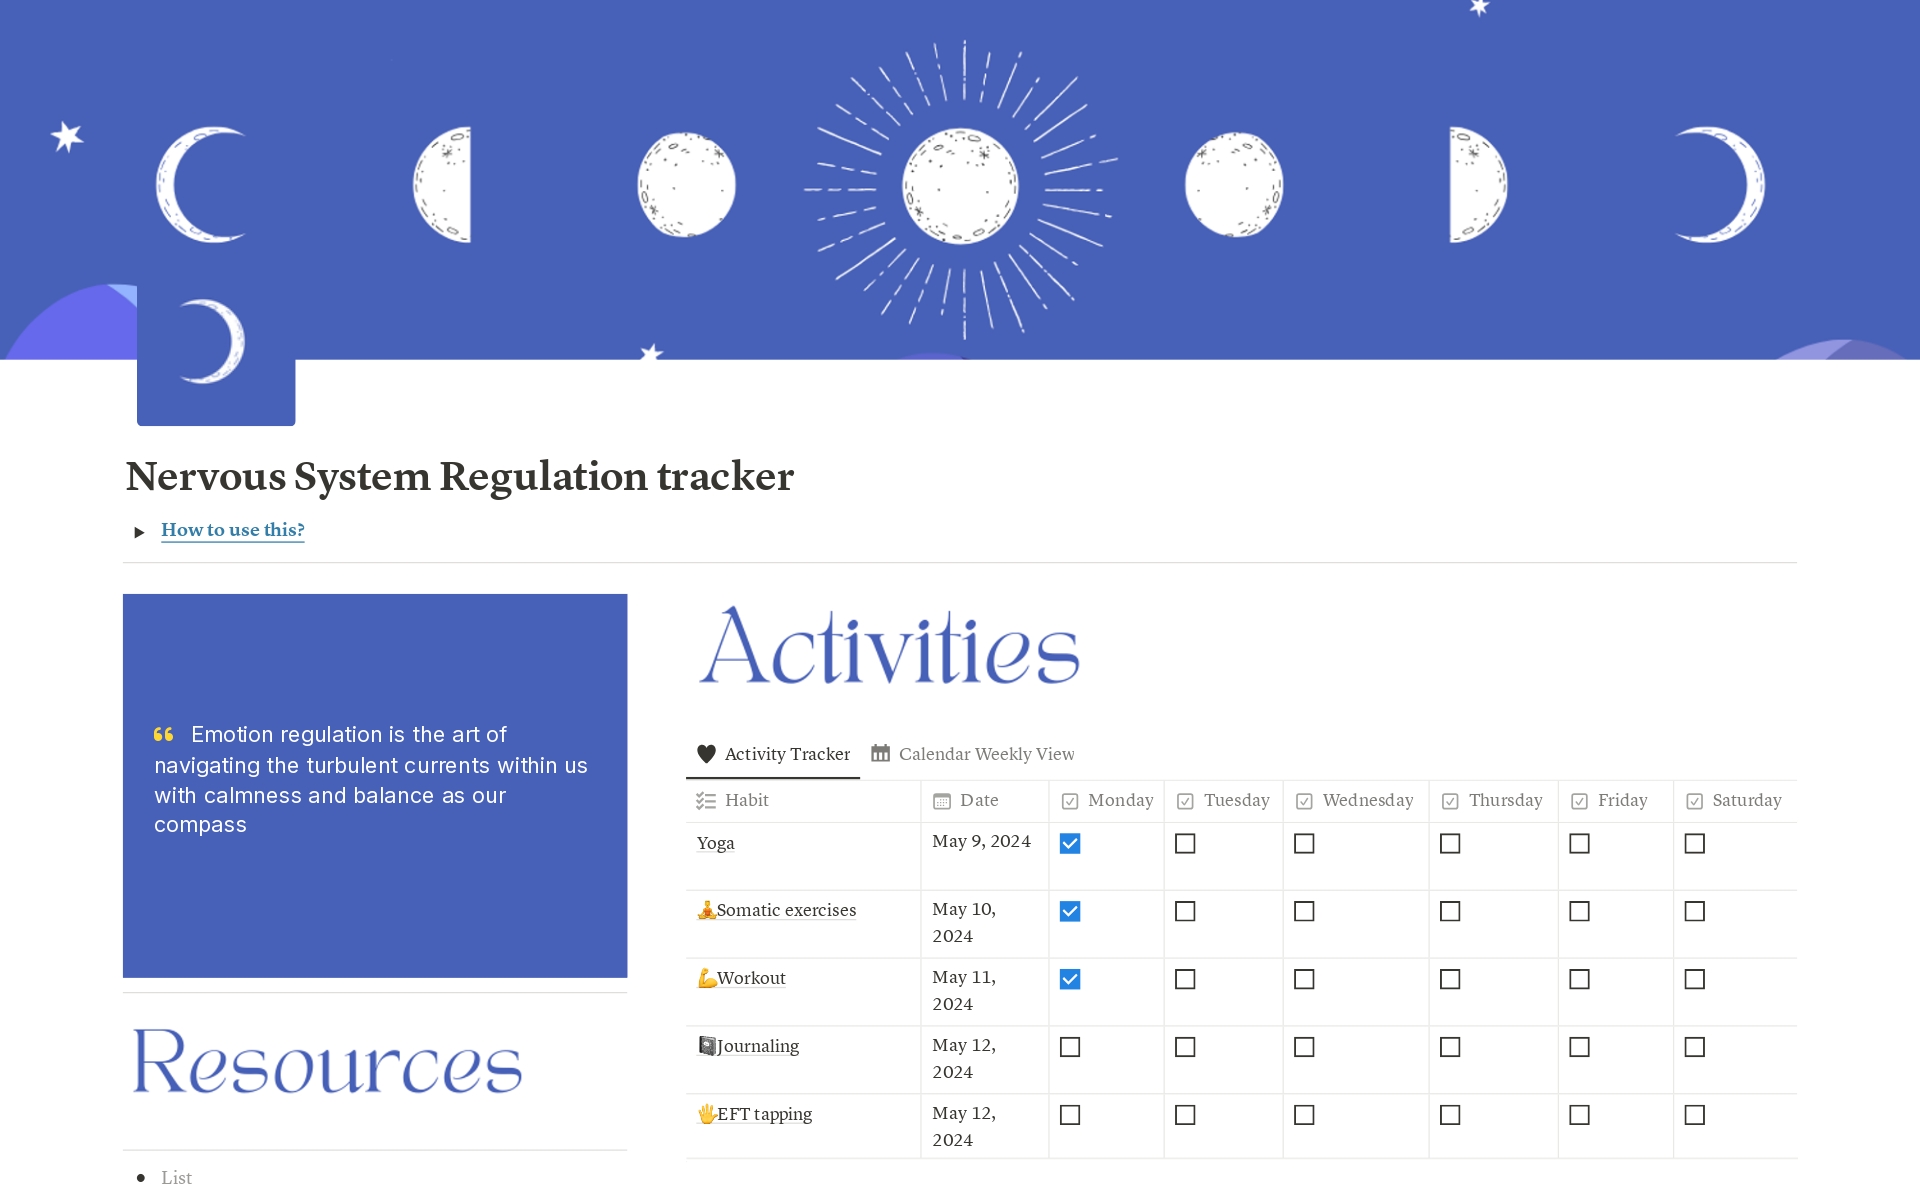 This Notion template is designed to help you manage and optimize your nervous system regulation. Whether you're seeking to reduce stress, improve mood, or enhance overall well-being, this template provides a comprehensive framework for tracking activities, symptoms, habits, 